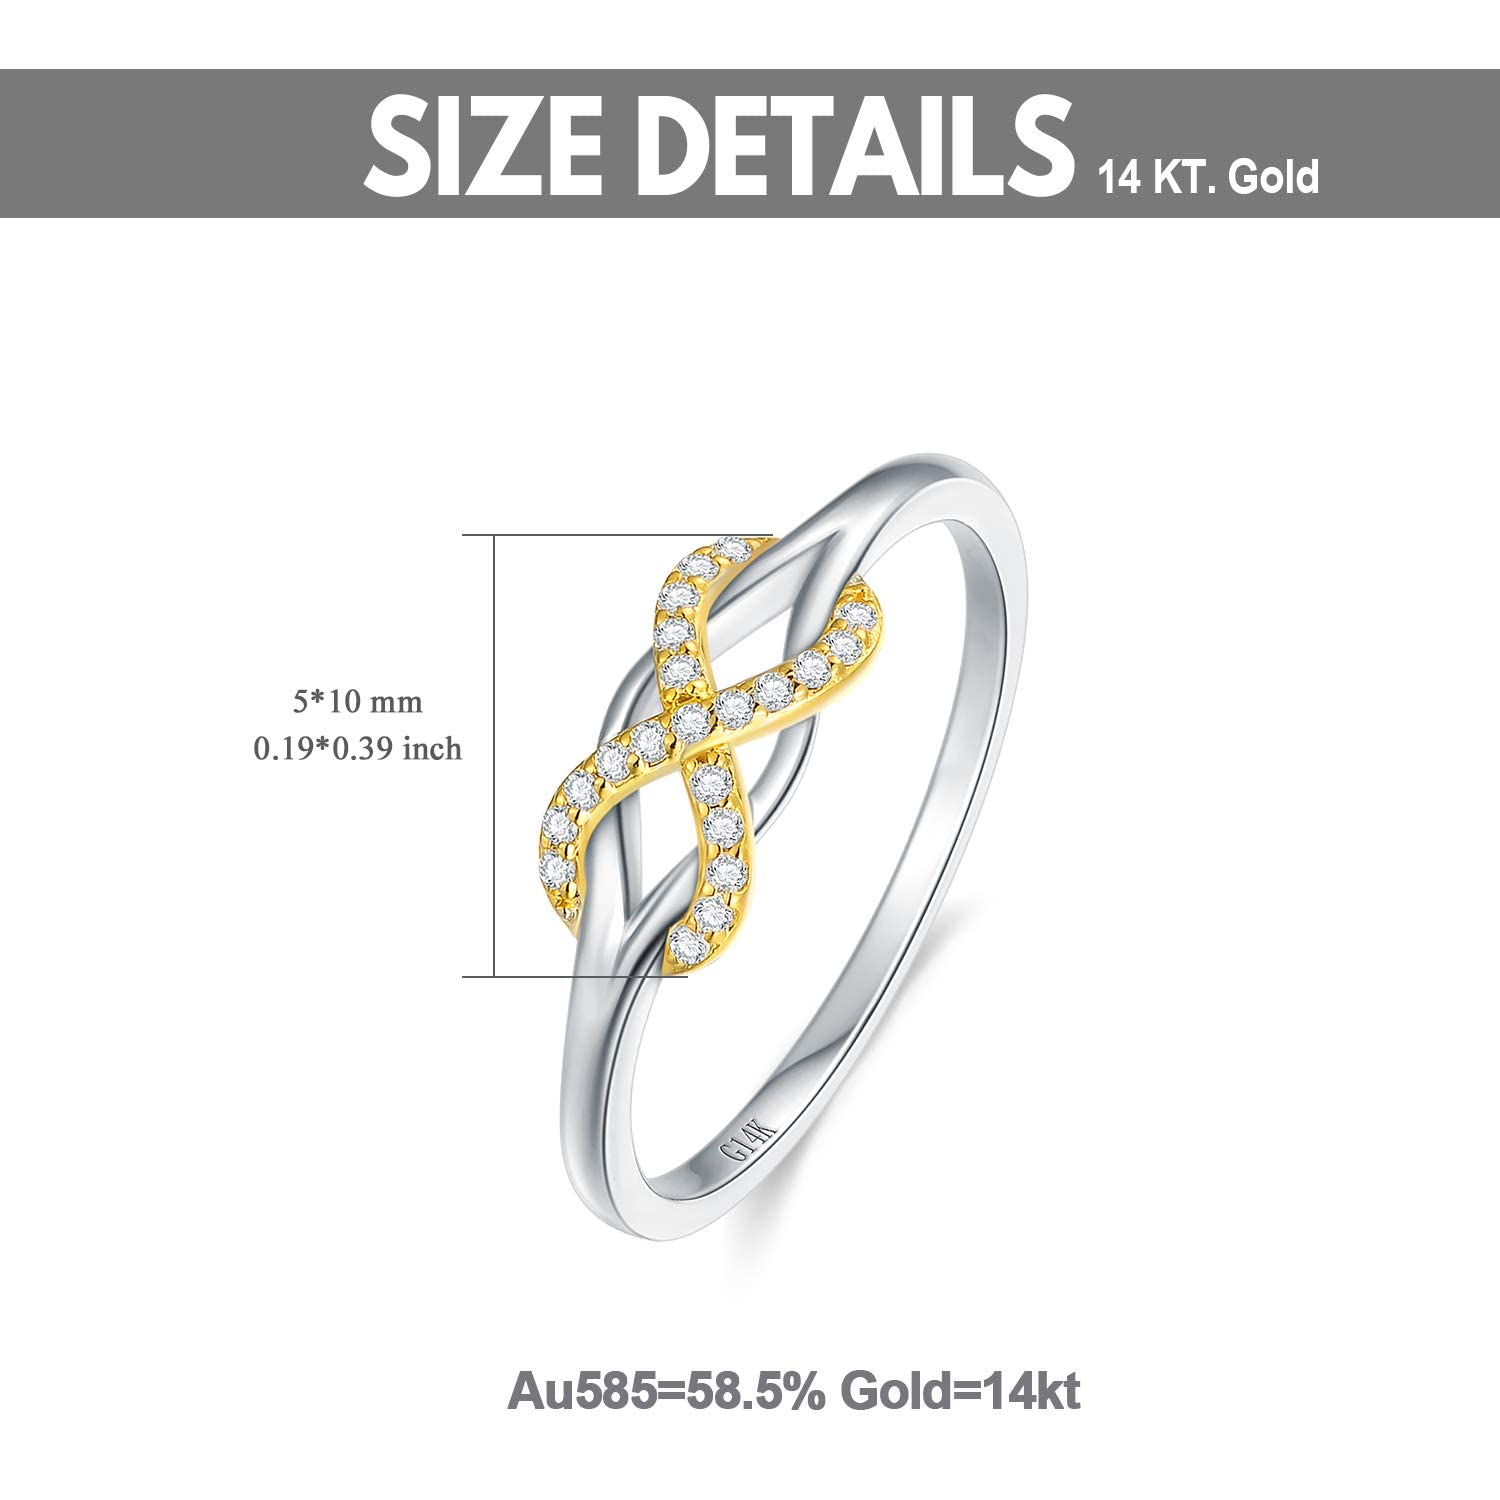 SISGEM Infinity Love Band Ring,14K Solid Gold Celtic Love Knot Symbol Natural Diamond Ring Forever Endless Promise Ring Anniversary Wedding Engagement Band for Women Girls Size 5-11